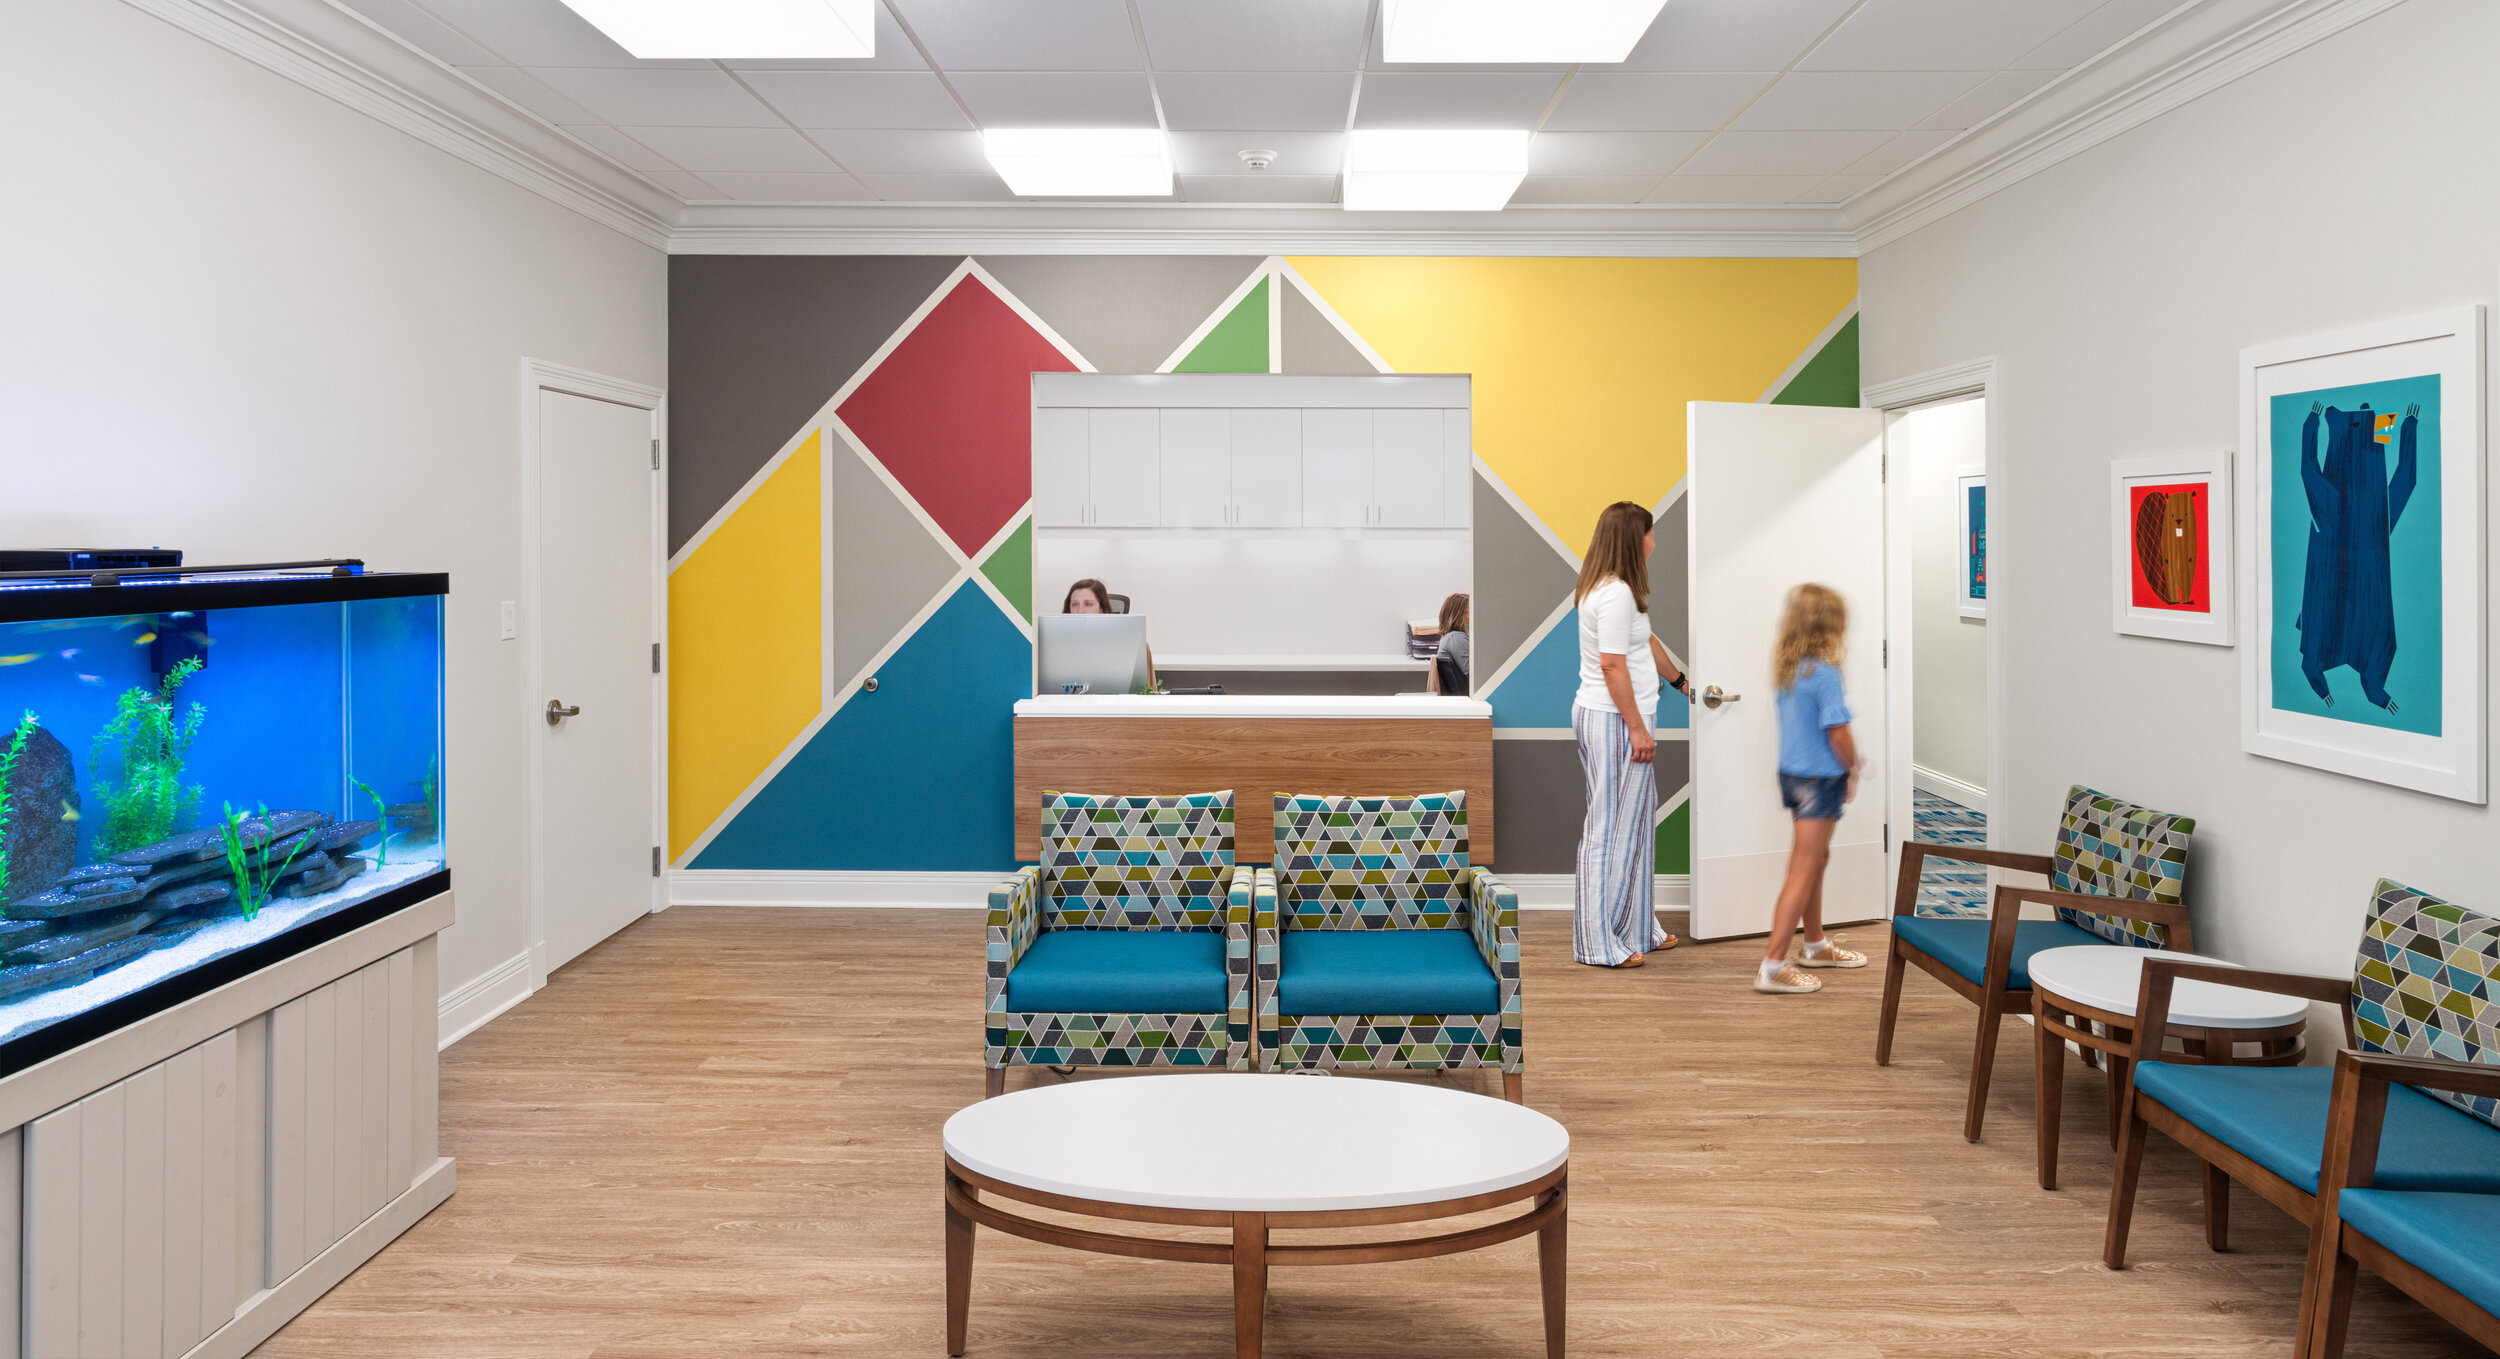 An interior photography of the consultation room at a healthcare center.